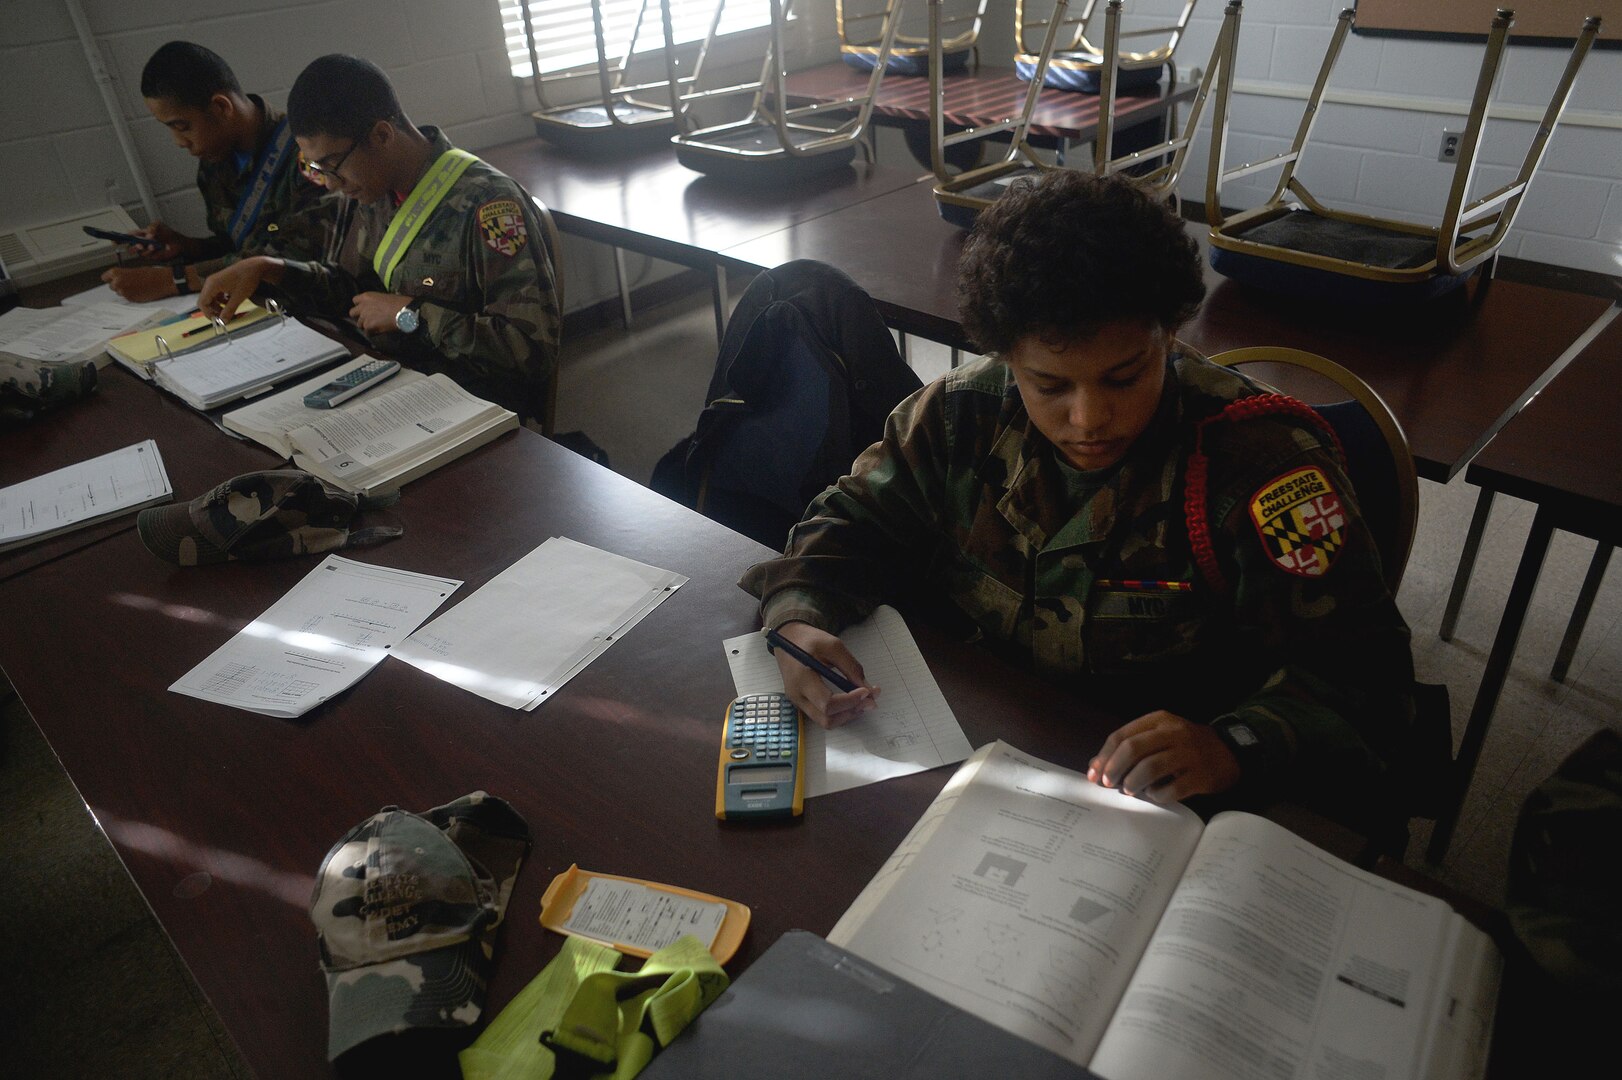 Devin Dunn, a cadet with the Maryland National Guard’s Freestate ChalleNGe Academy, which provides a means for "at risk" 16-to-18-year-olds to earn their GED certificate or high school diploma, works through math problems during class at the academy, Nov. 17, 2015. Part of the National Guard’s Youth ChalleNGe Program, which includes 37 academies throughout the country, the Freestate ChalleNGe Academy opened in 1993 and was one of the first academies of the program.